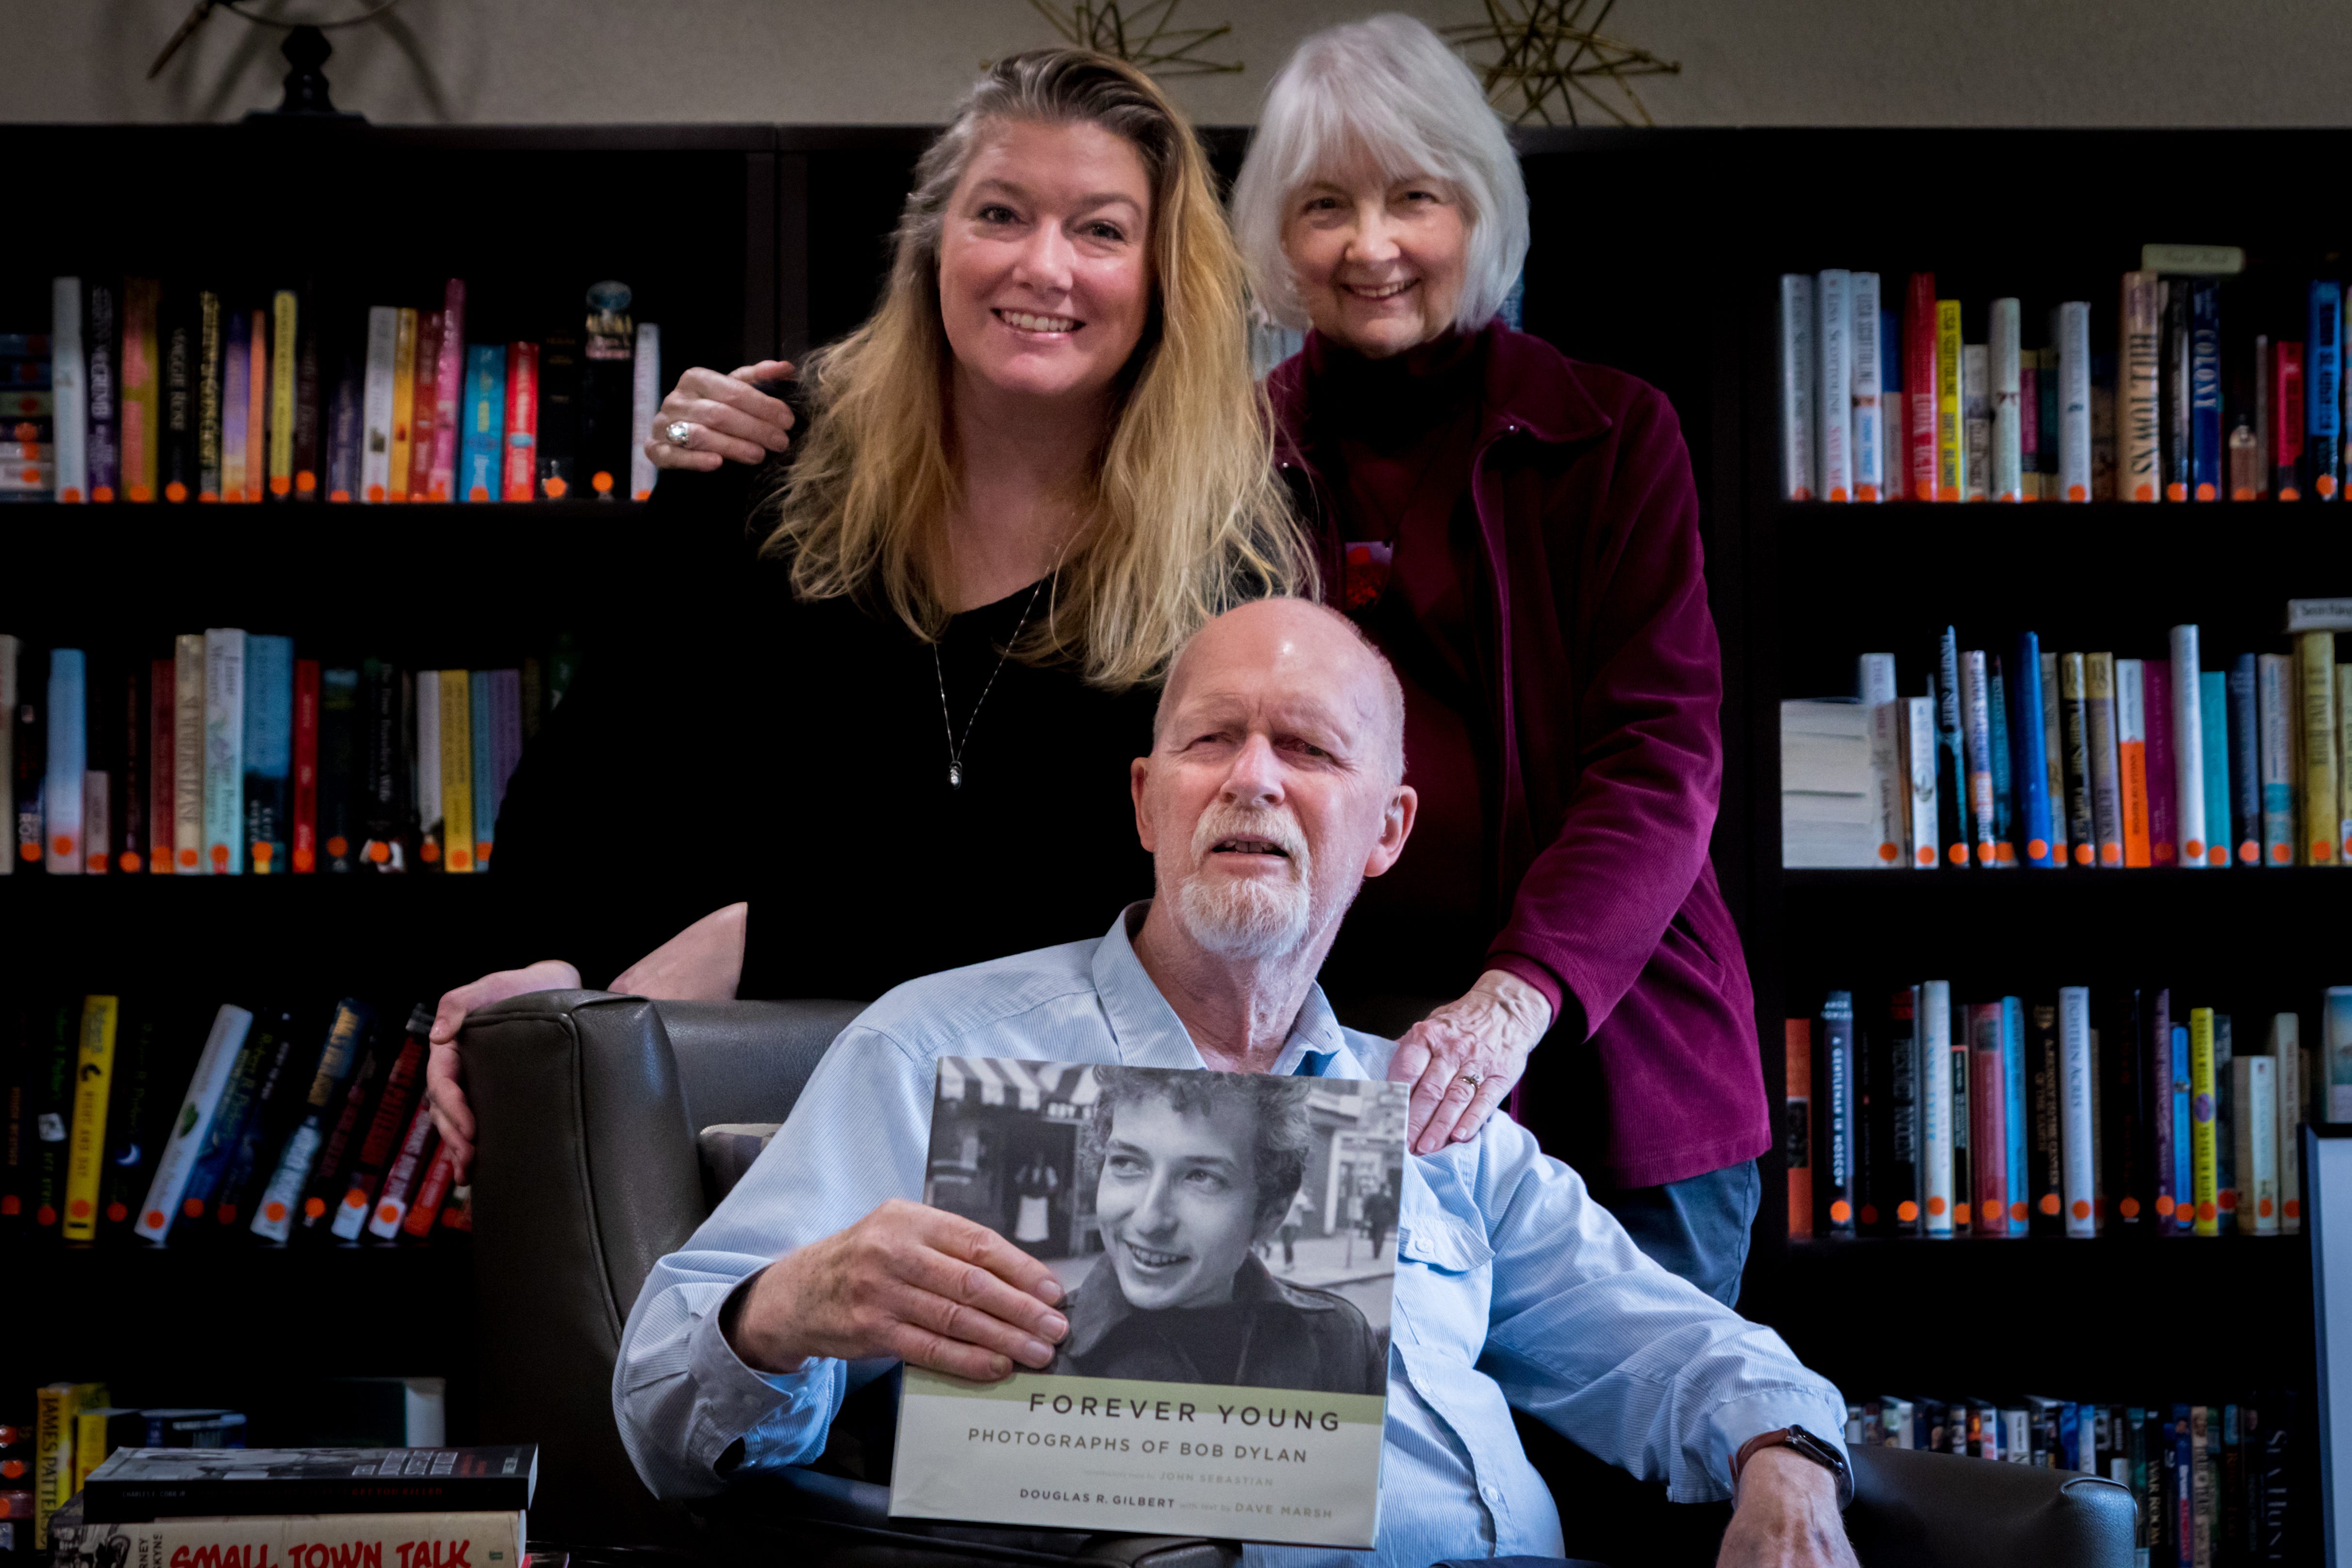 Photographer Douglas R. Gilbert poses with daughter Anne Carpenter and wife Barbara Gilbert, while displaying a book of his photographs of a young Bob Dylan from 1964.